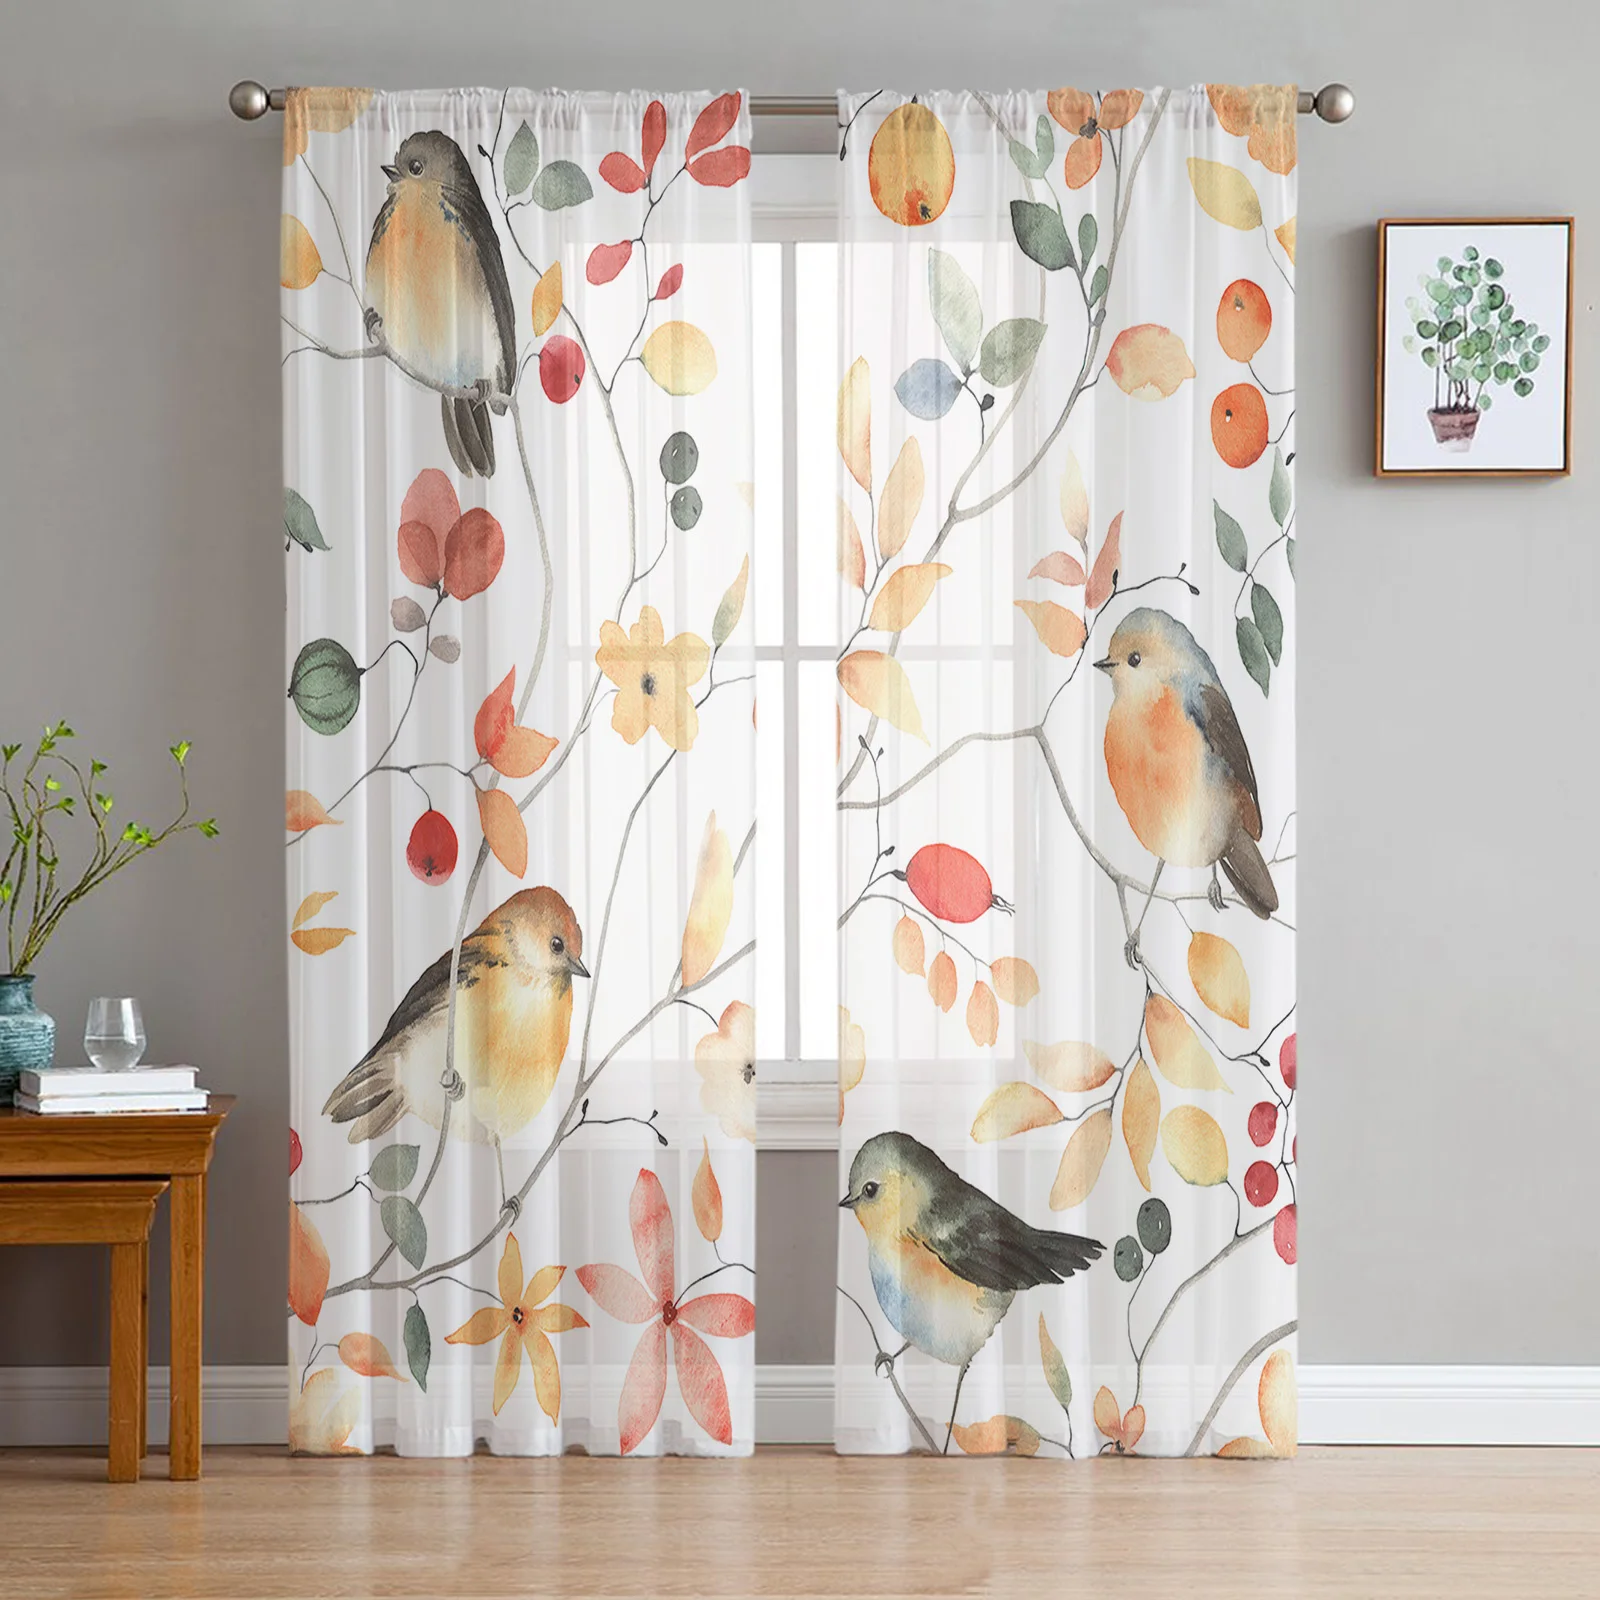 

Autumn Bird Flowers Tree Branches Sheer Curtains for Living Room Bedroom Tulle Curtain for Kitchen Voile Curtain Blind Panels